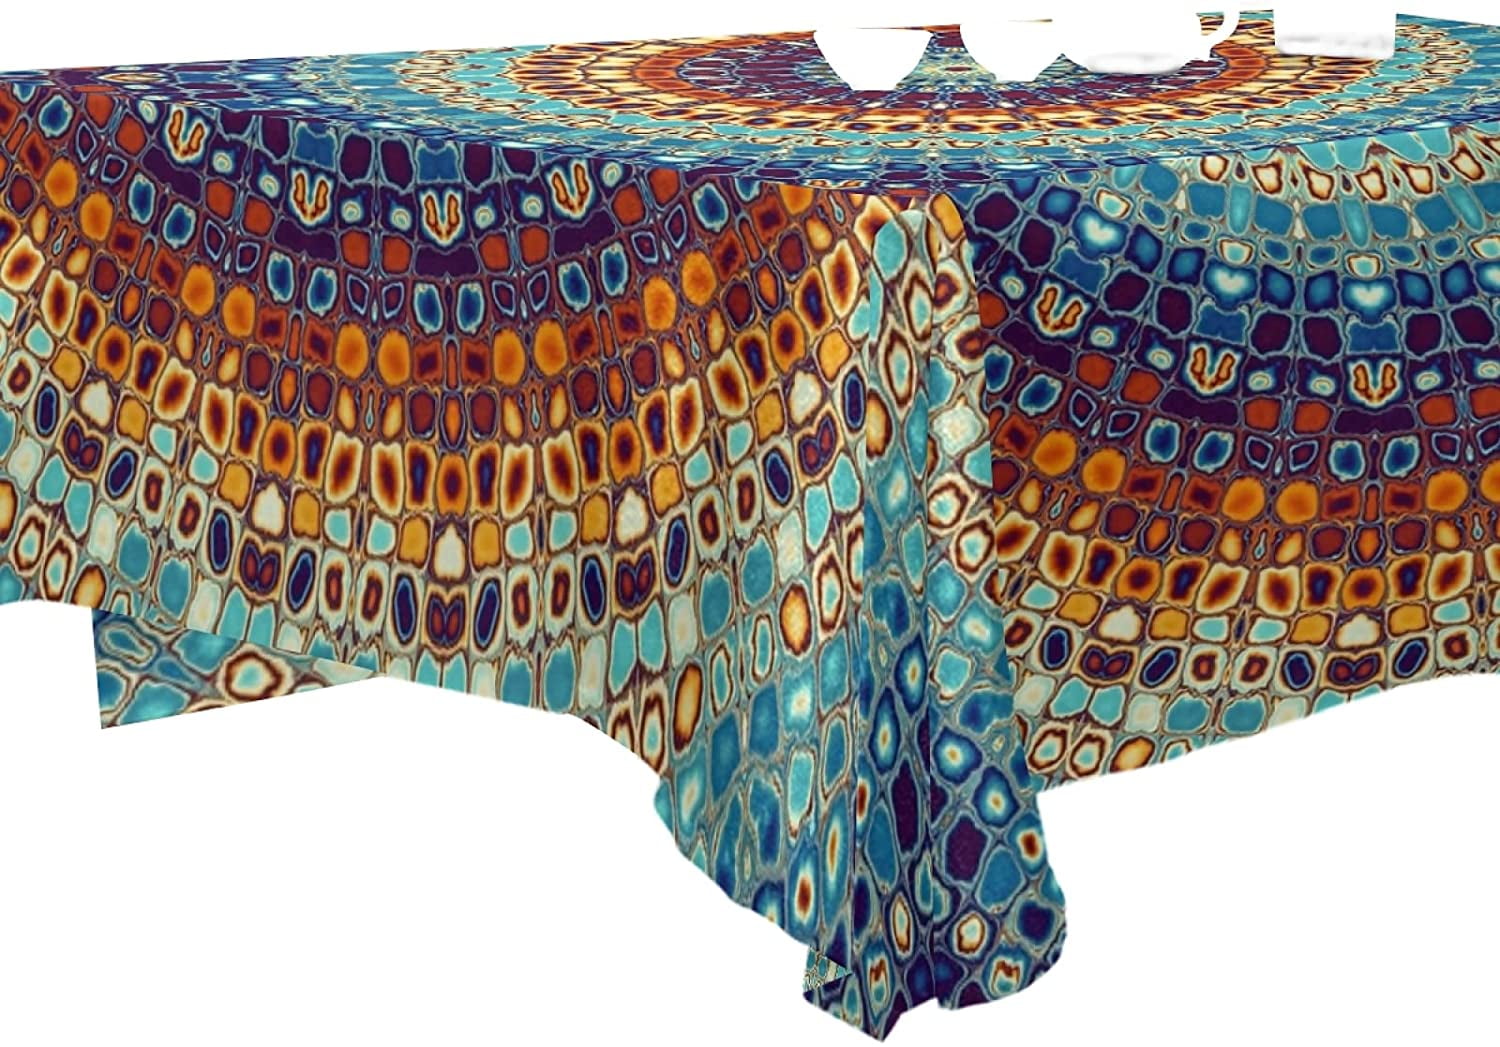 xigua Bohemia Mandala Tablecloth Durable Rectangle Tablecloths Waterproof Square Table Cloth Stain Resistant Table Cover for Outdoor Picnic Restaurant Home Decoration 54 x 72 Inch